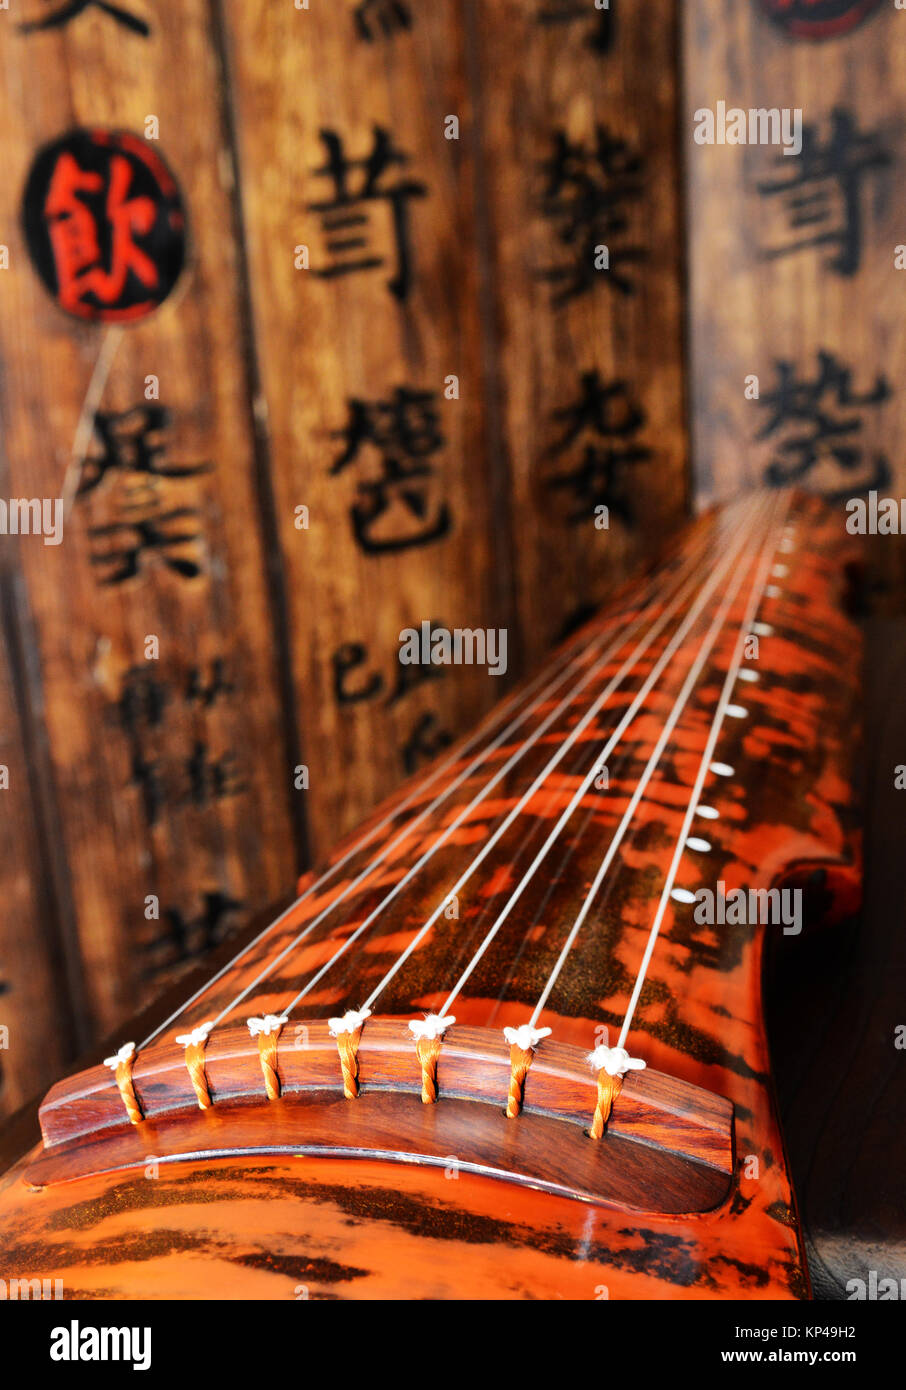 Guqin is a traditional Chinese musical string instrument. Stock Photo